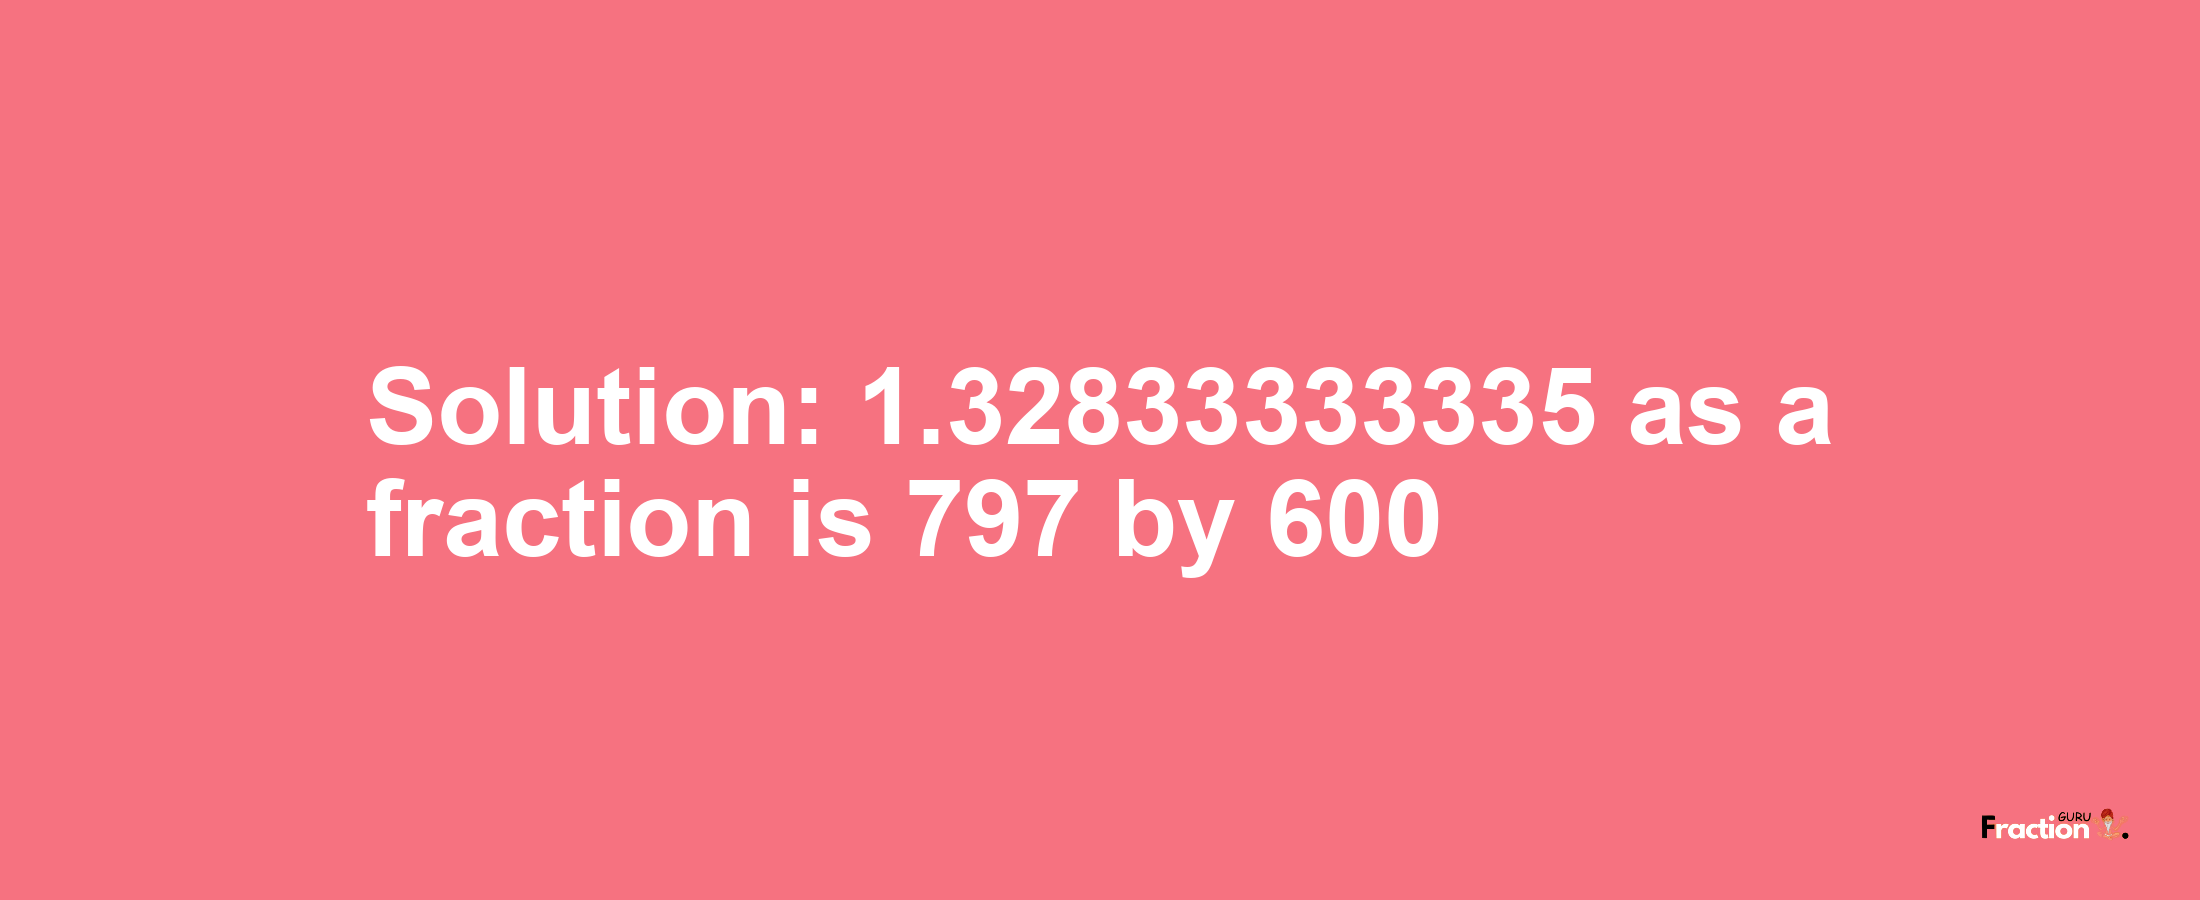 Solution:1.32833333335 as a fraction is 797/600